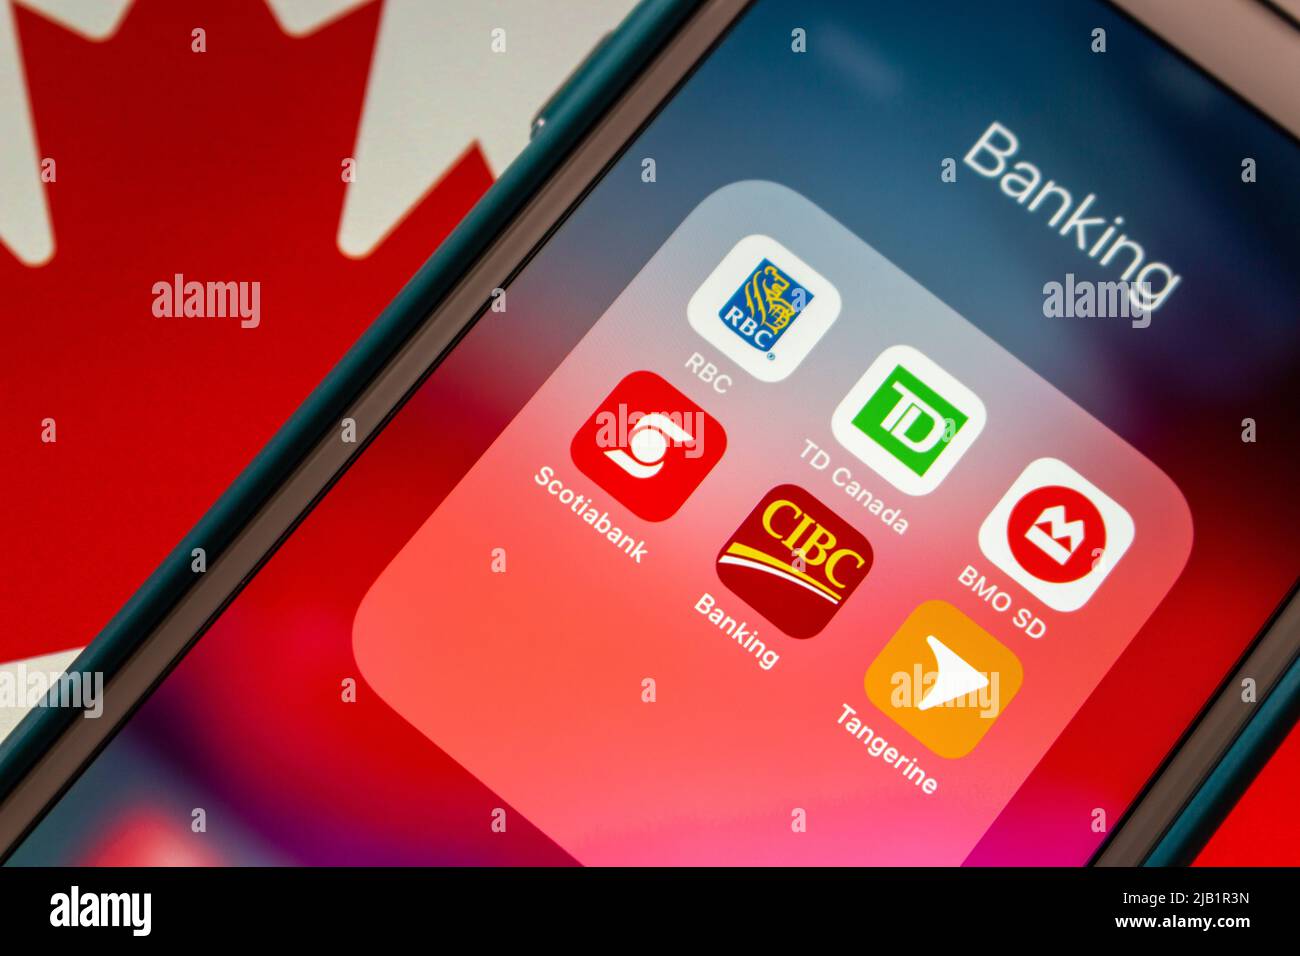 Royal Bank of Canada, TD Canada Trust, Bank of Montreal, Scotiabank, Canadian Imperial Bank of Commerce, Tangerine on iPhone on Canadian flag Stock Photo